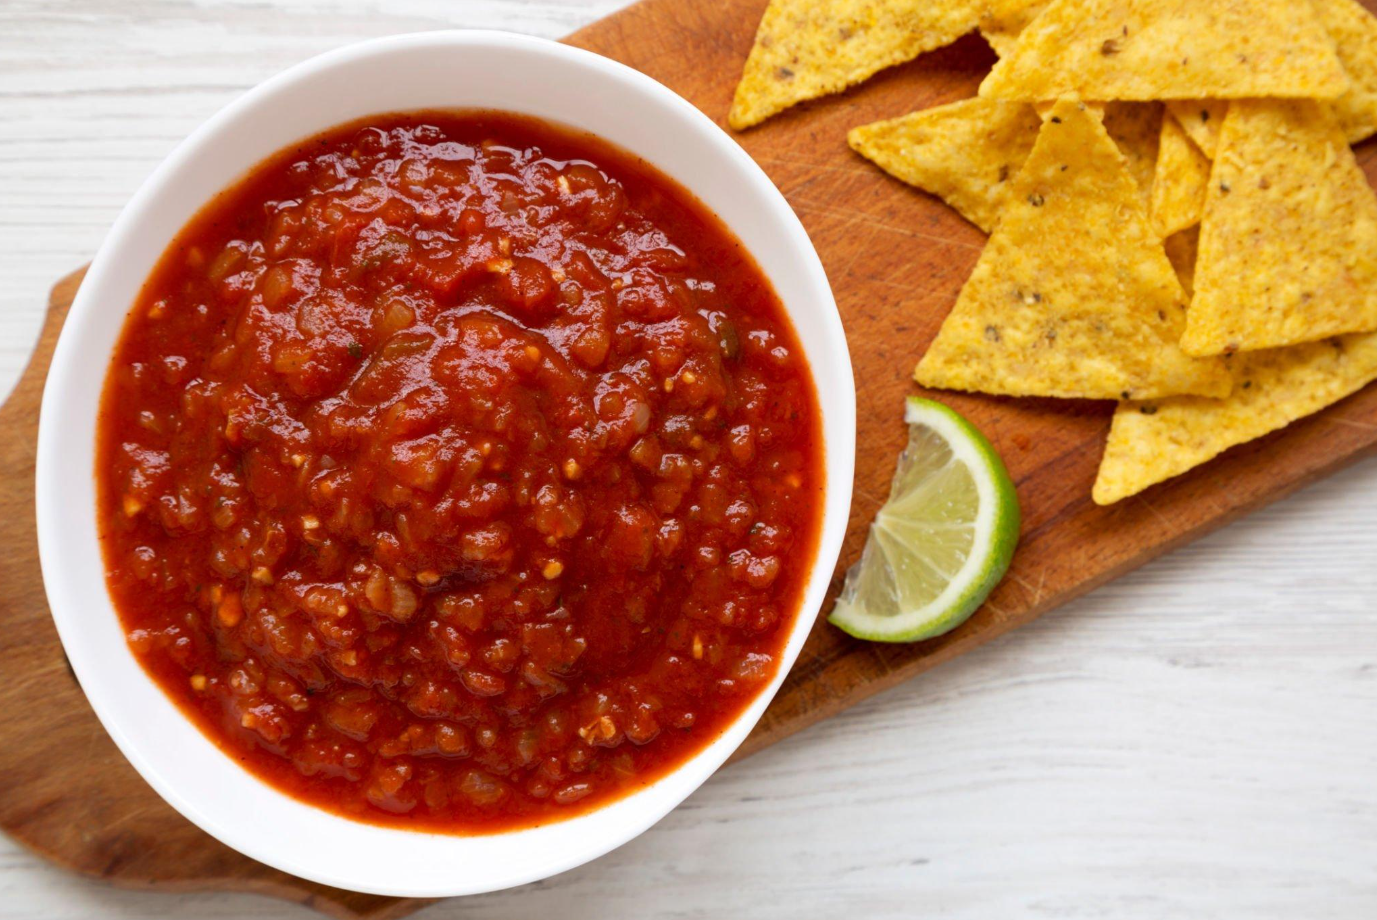 Preparing salsa with a balance of ingredients to reduce spiciness.